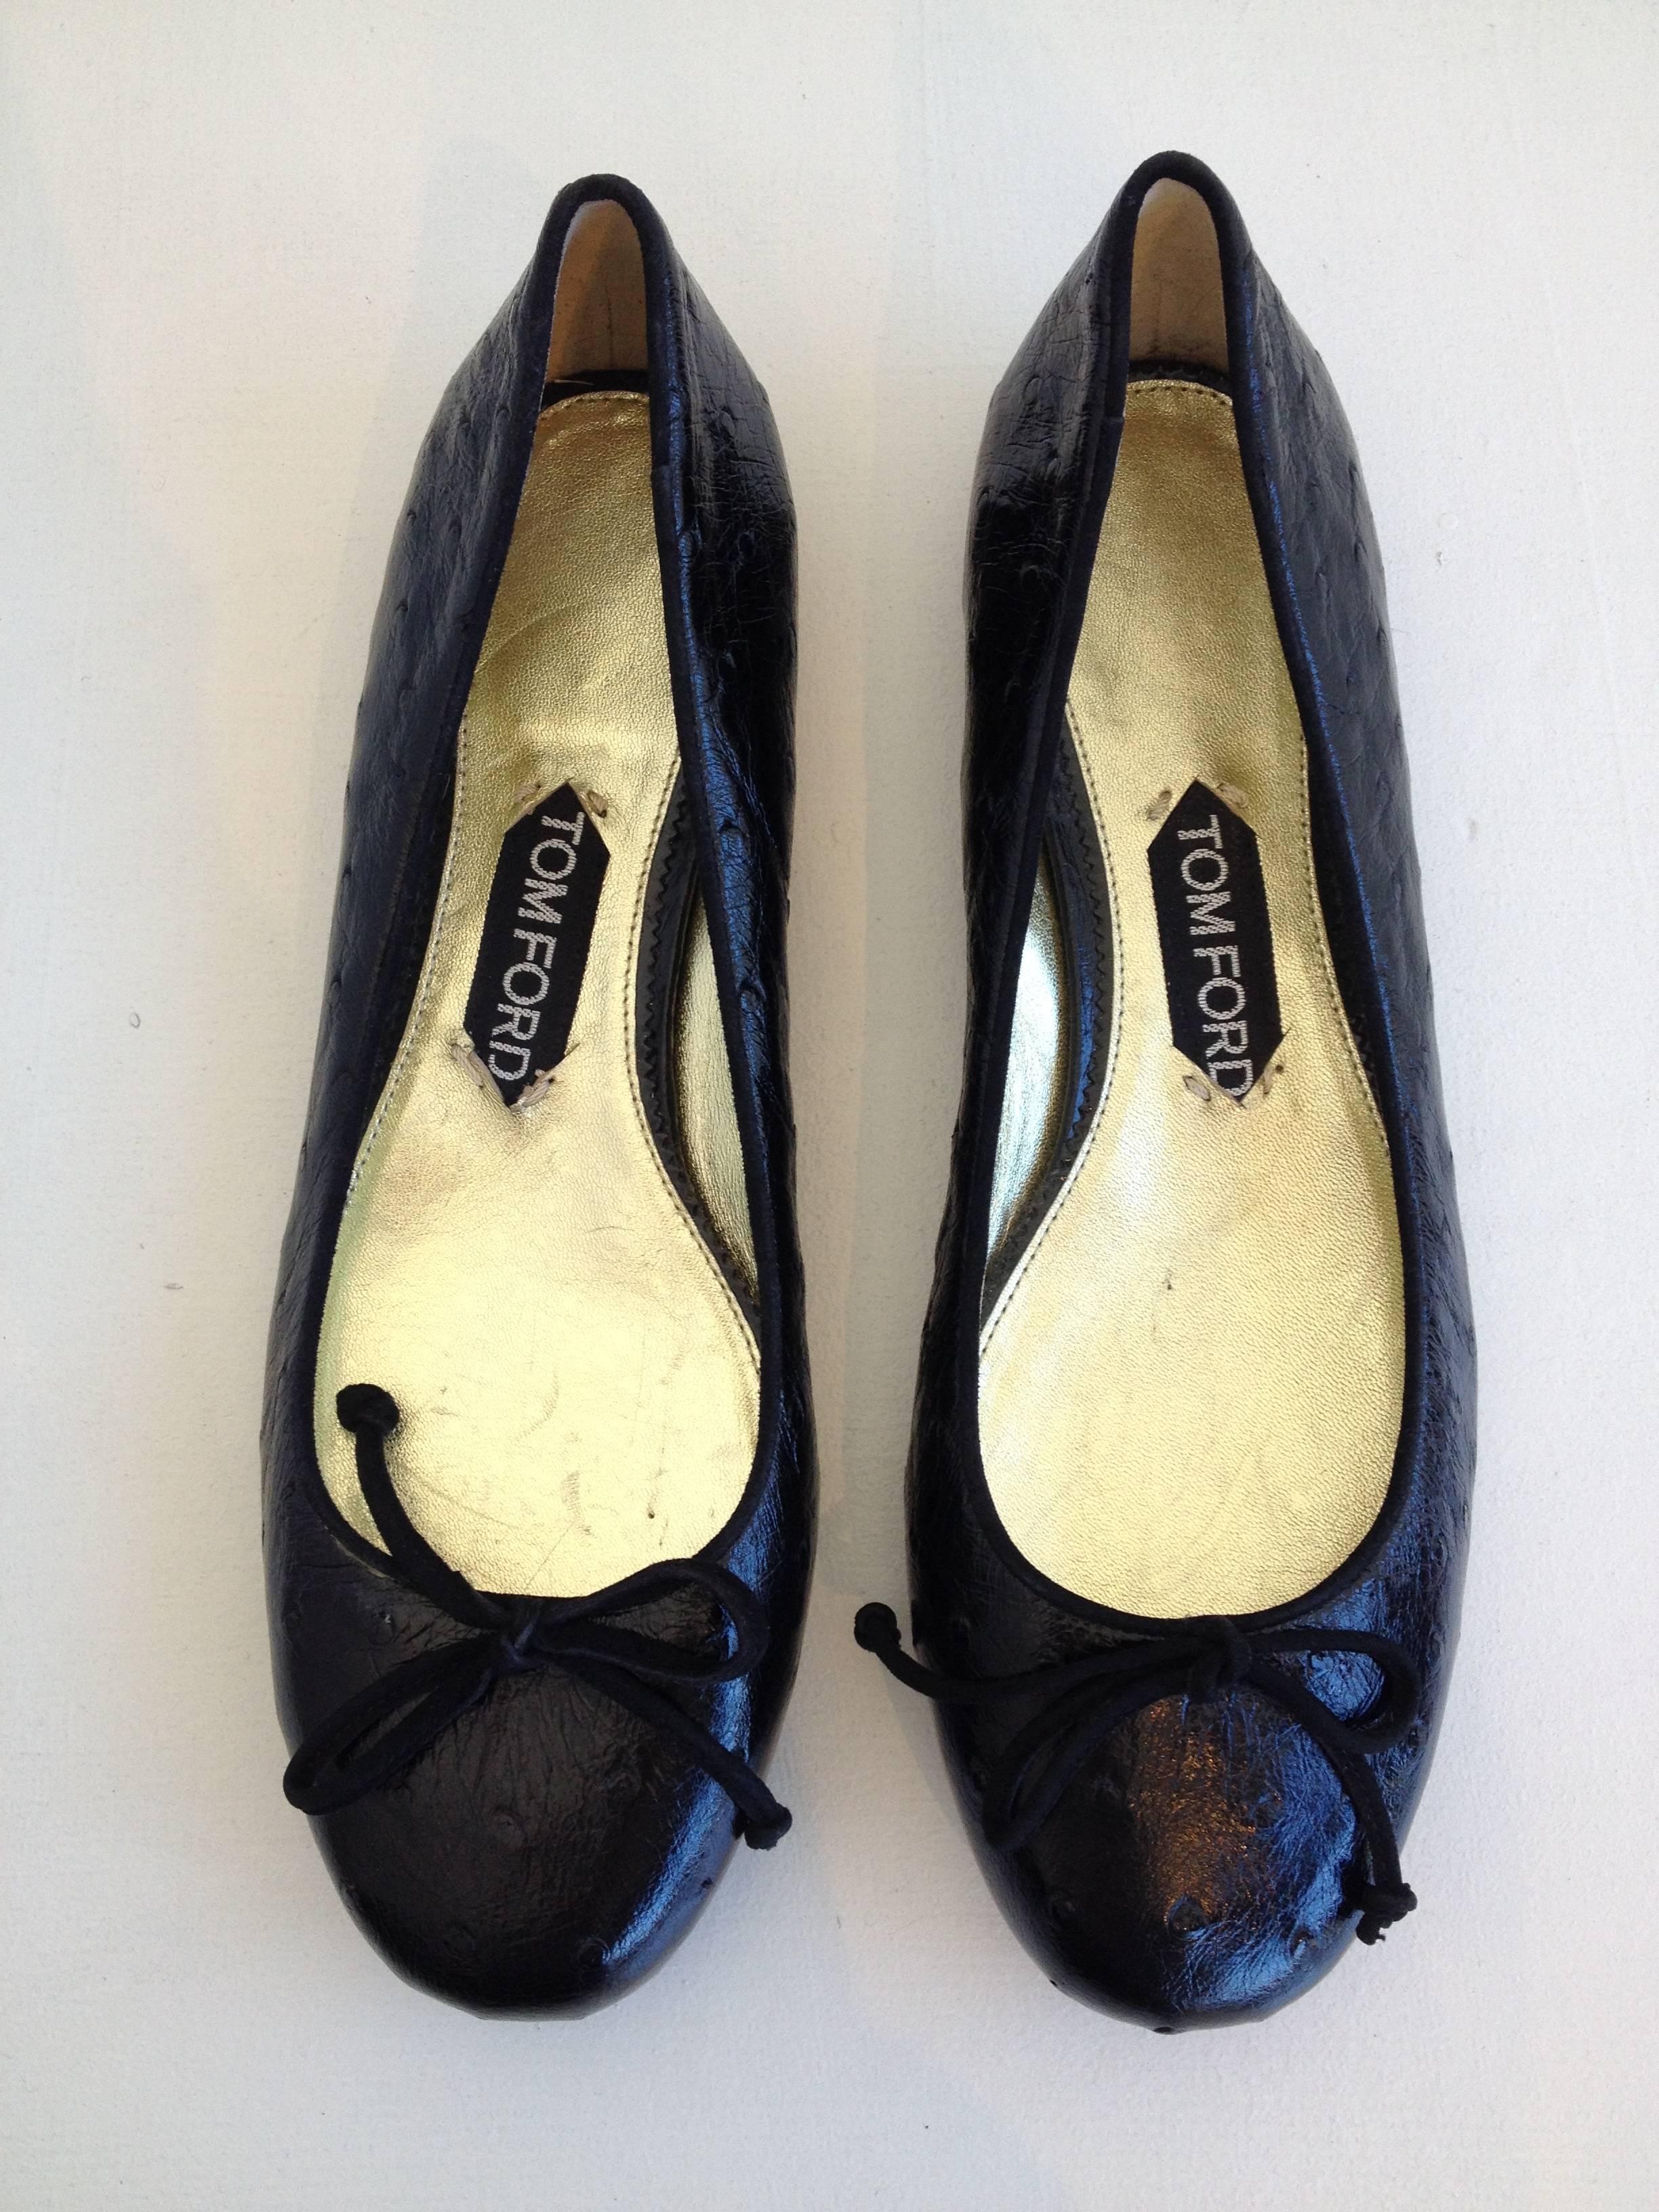 Beautiful ballet flats from Tom Ford. Black ostrich exterior with gold metallic lining. Quarter inch heel, classic ballerina cut.